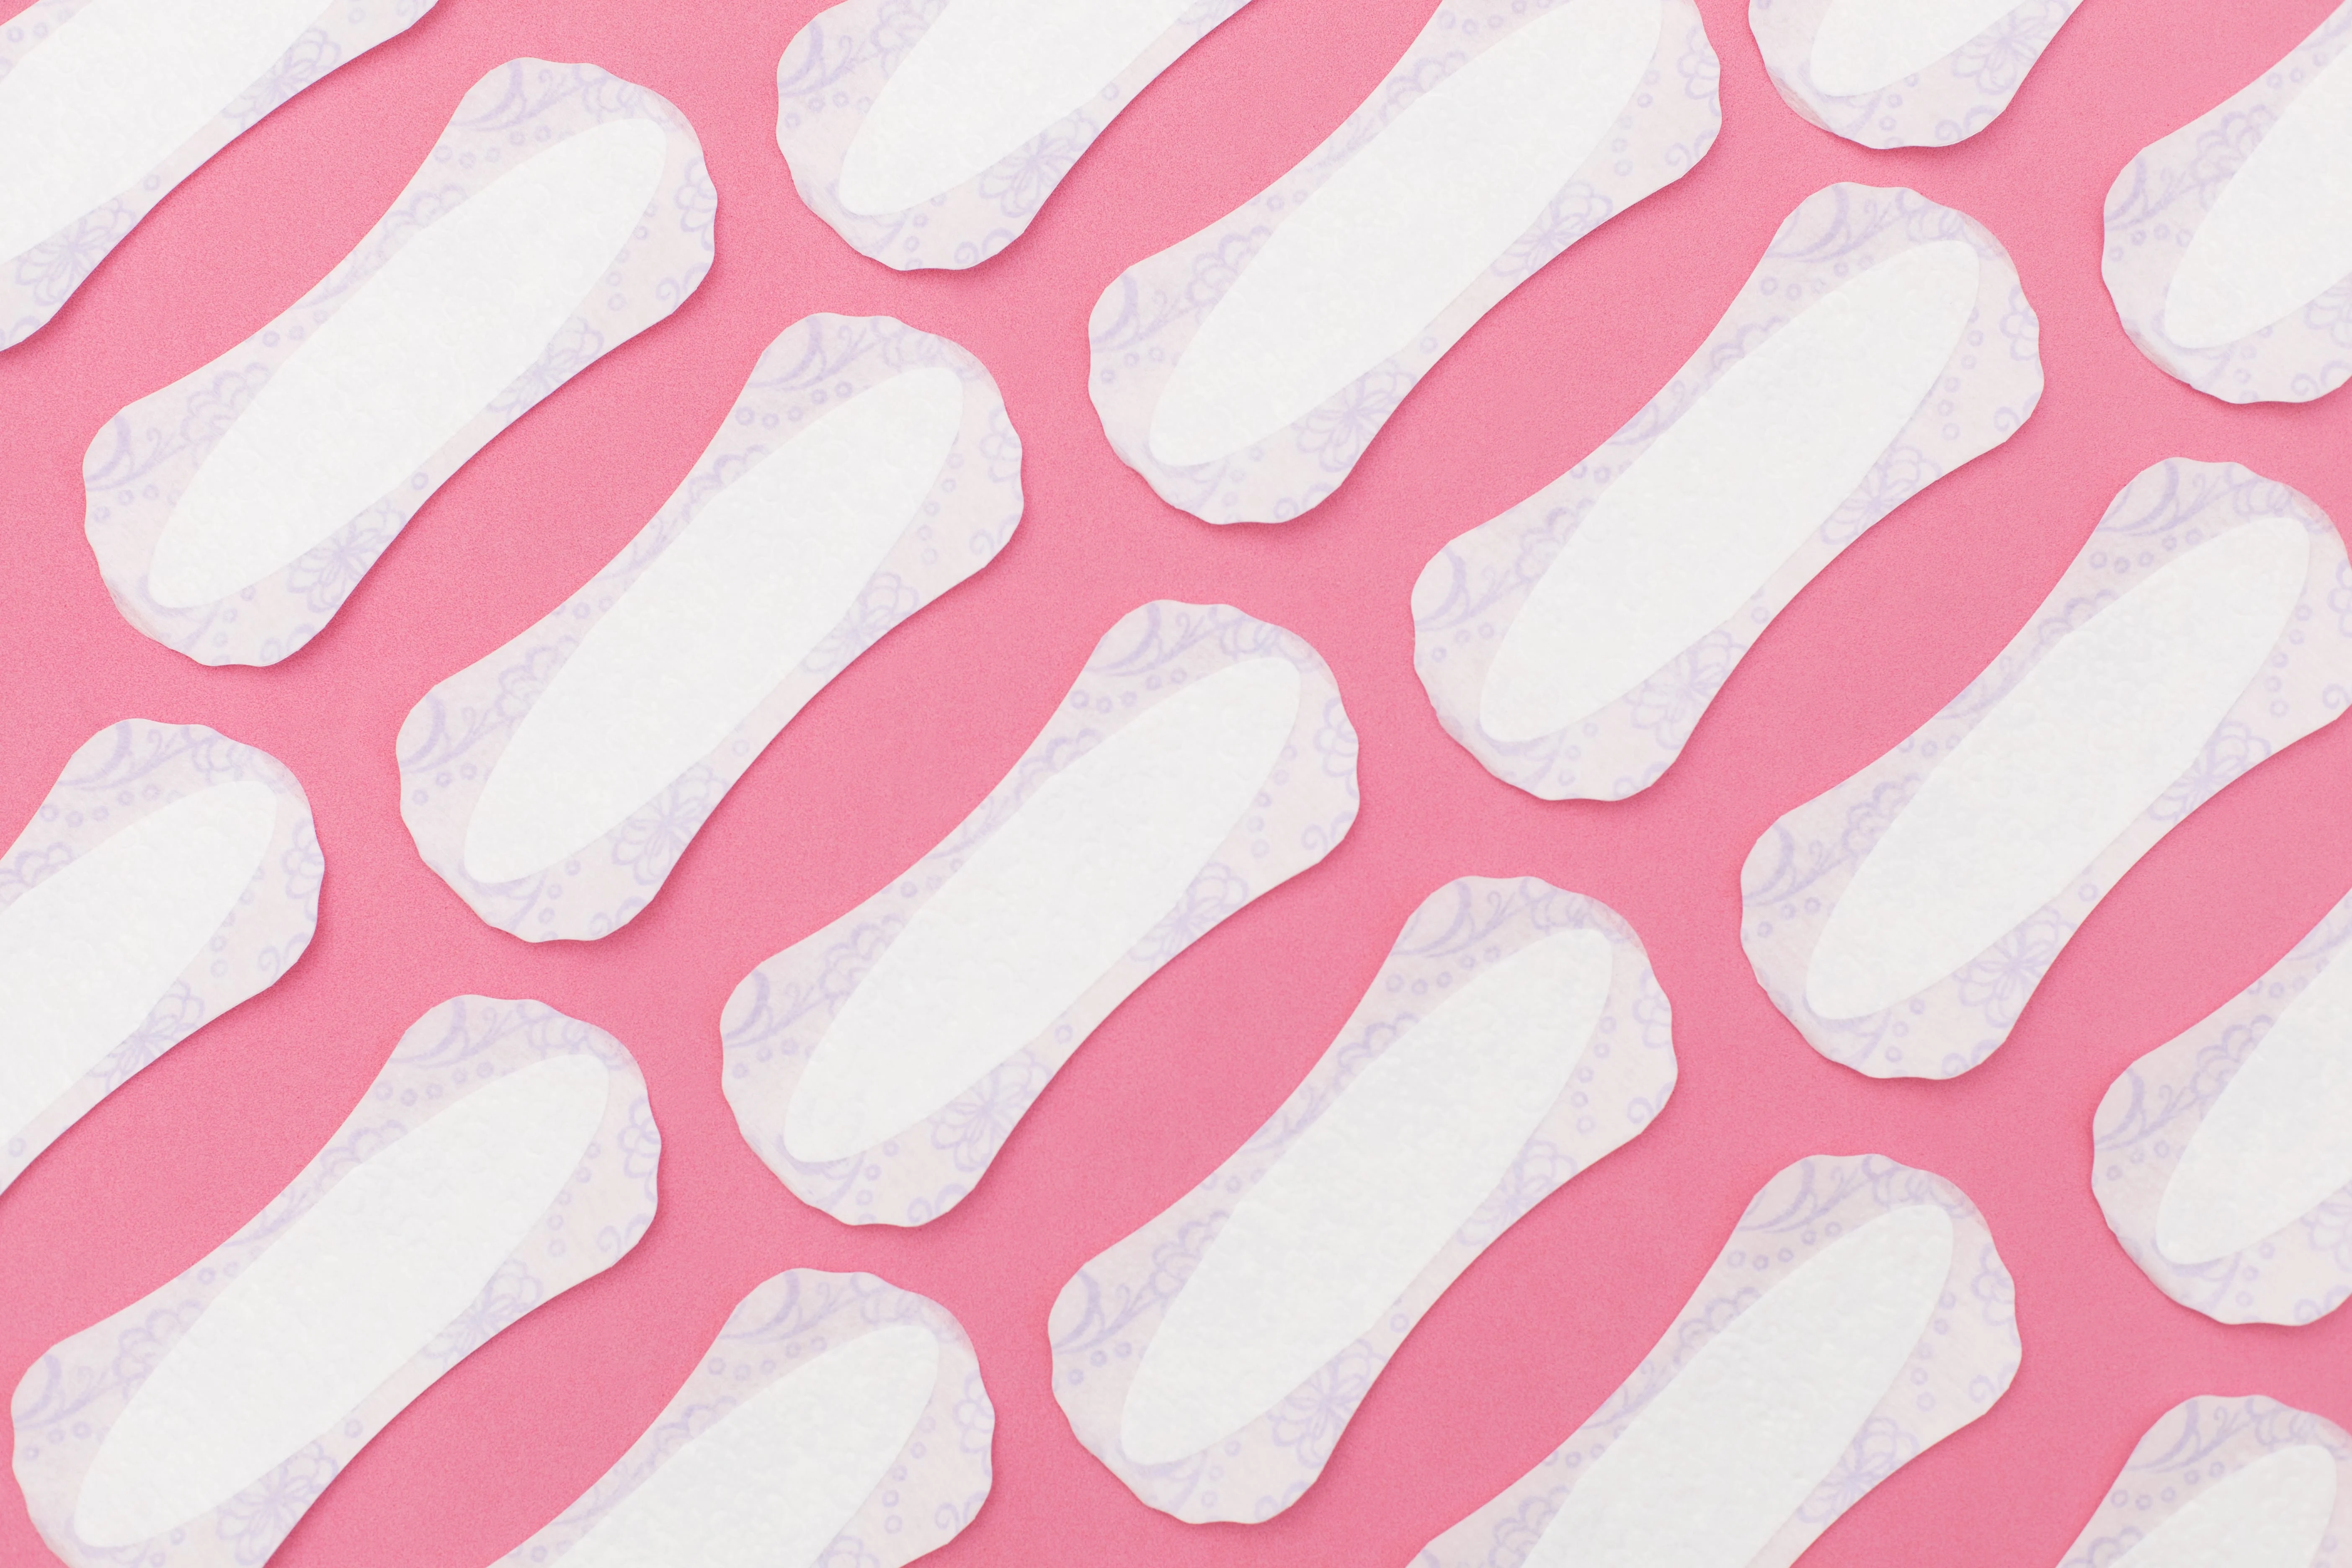 Always pantyliner on a pink background